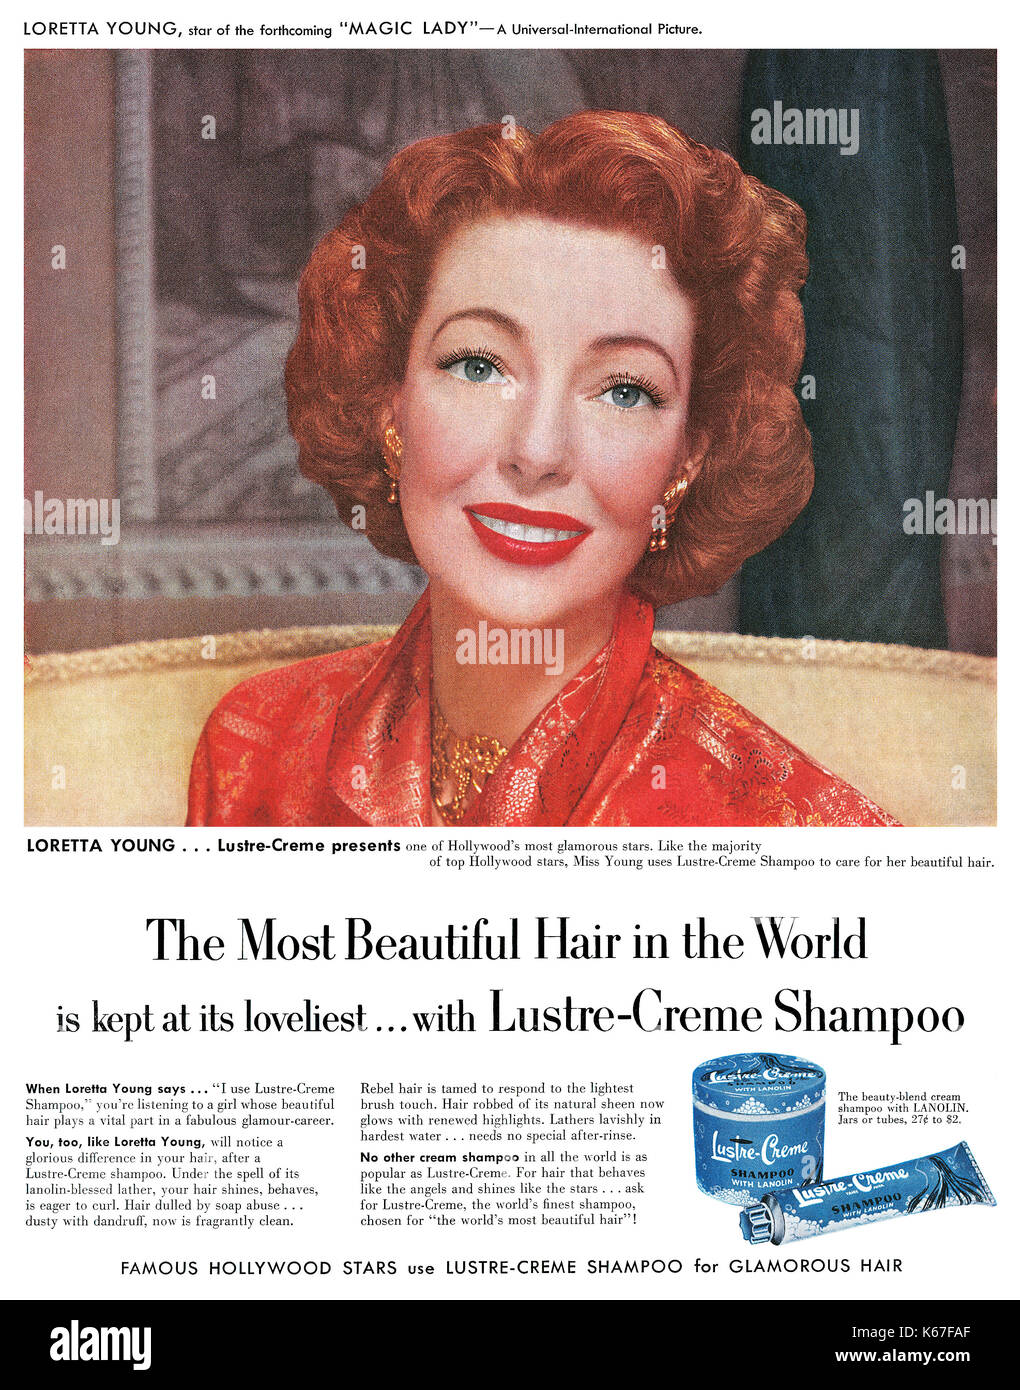 1952 U.S. advertisement for Lustre-Creme Shampoo, featuring Hollywood actress Loretta Young. Stock Photo